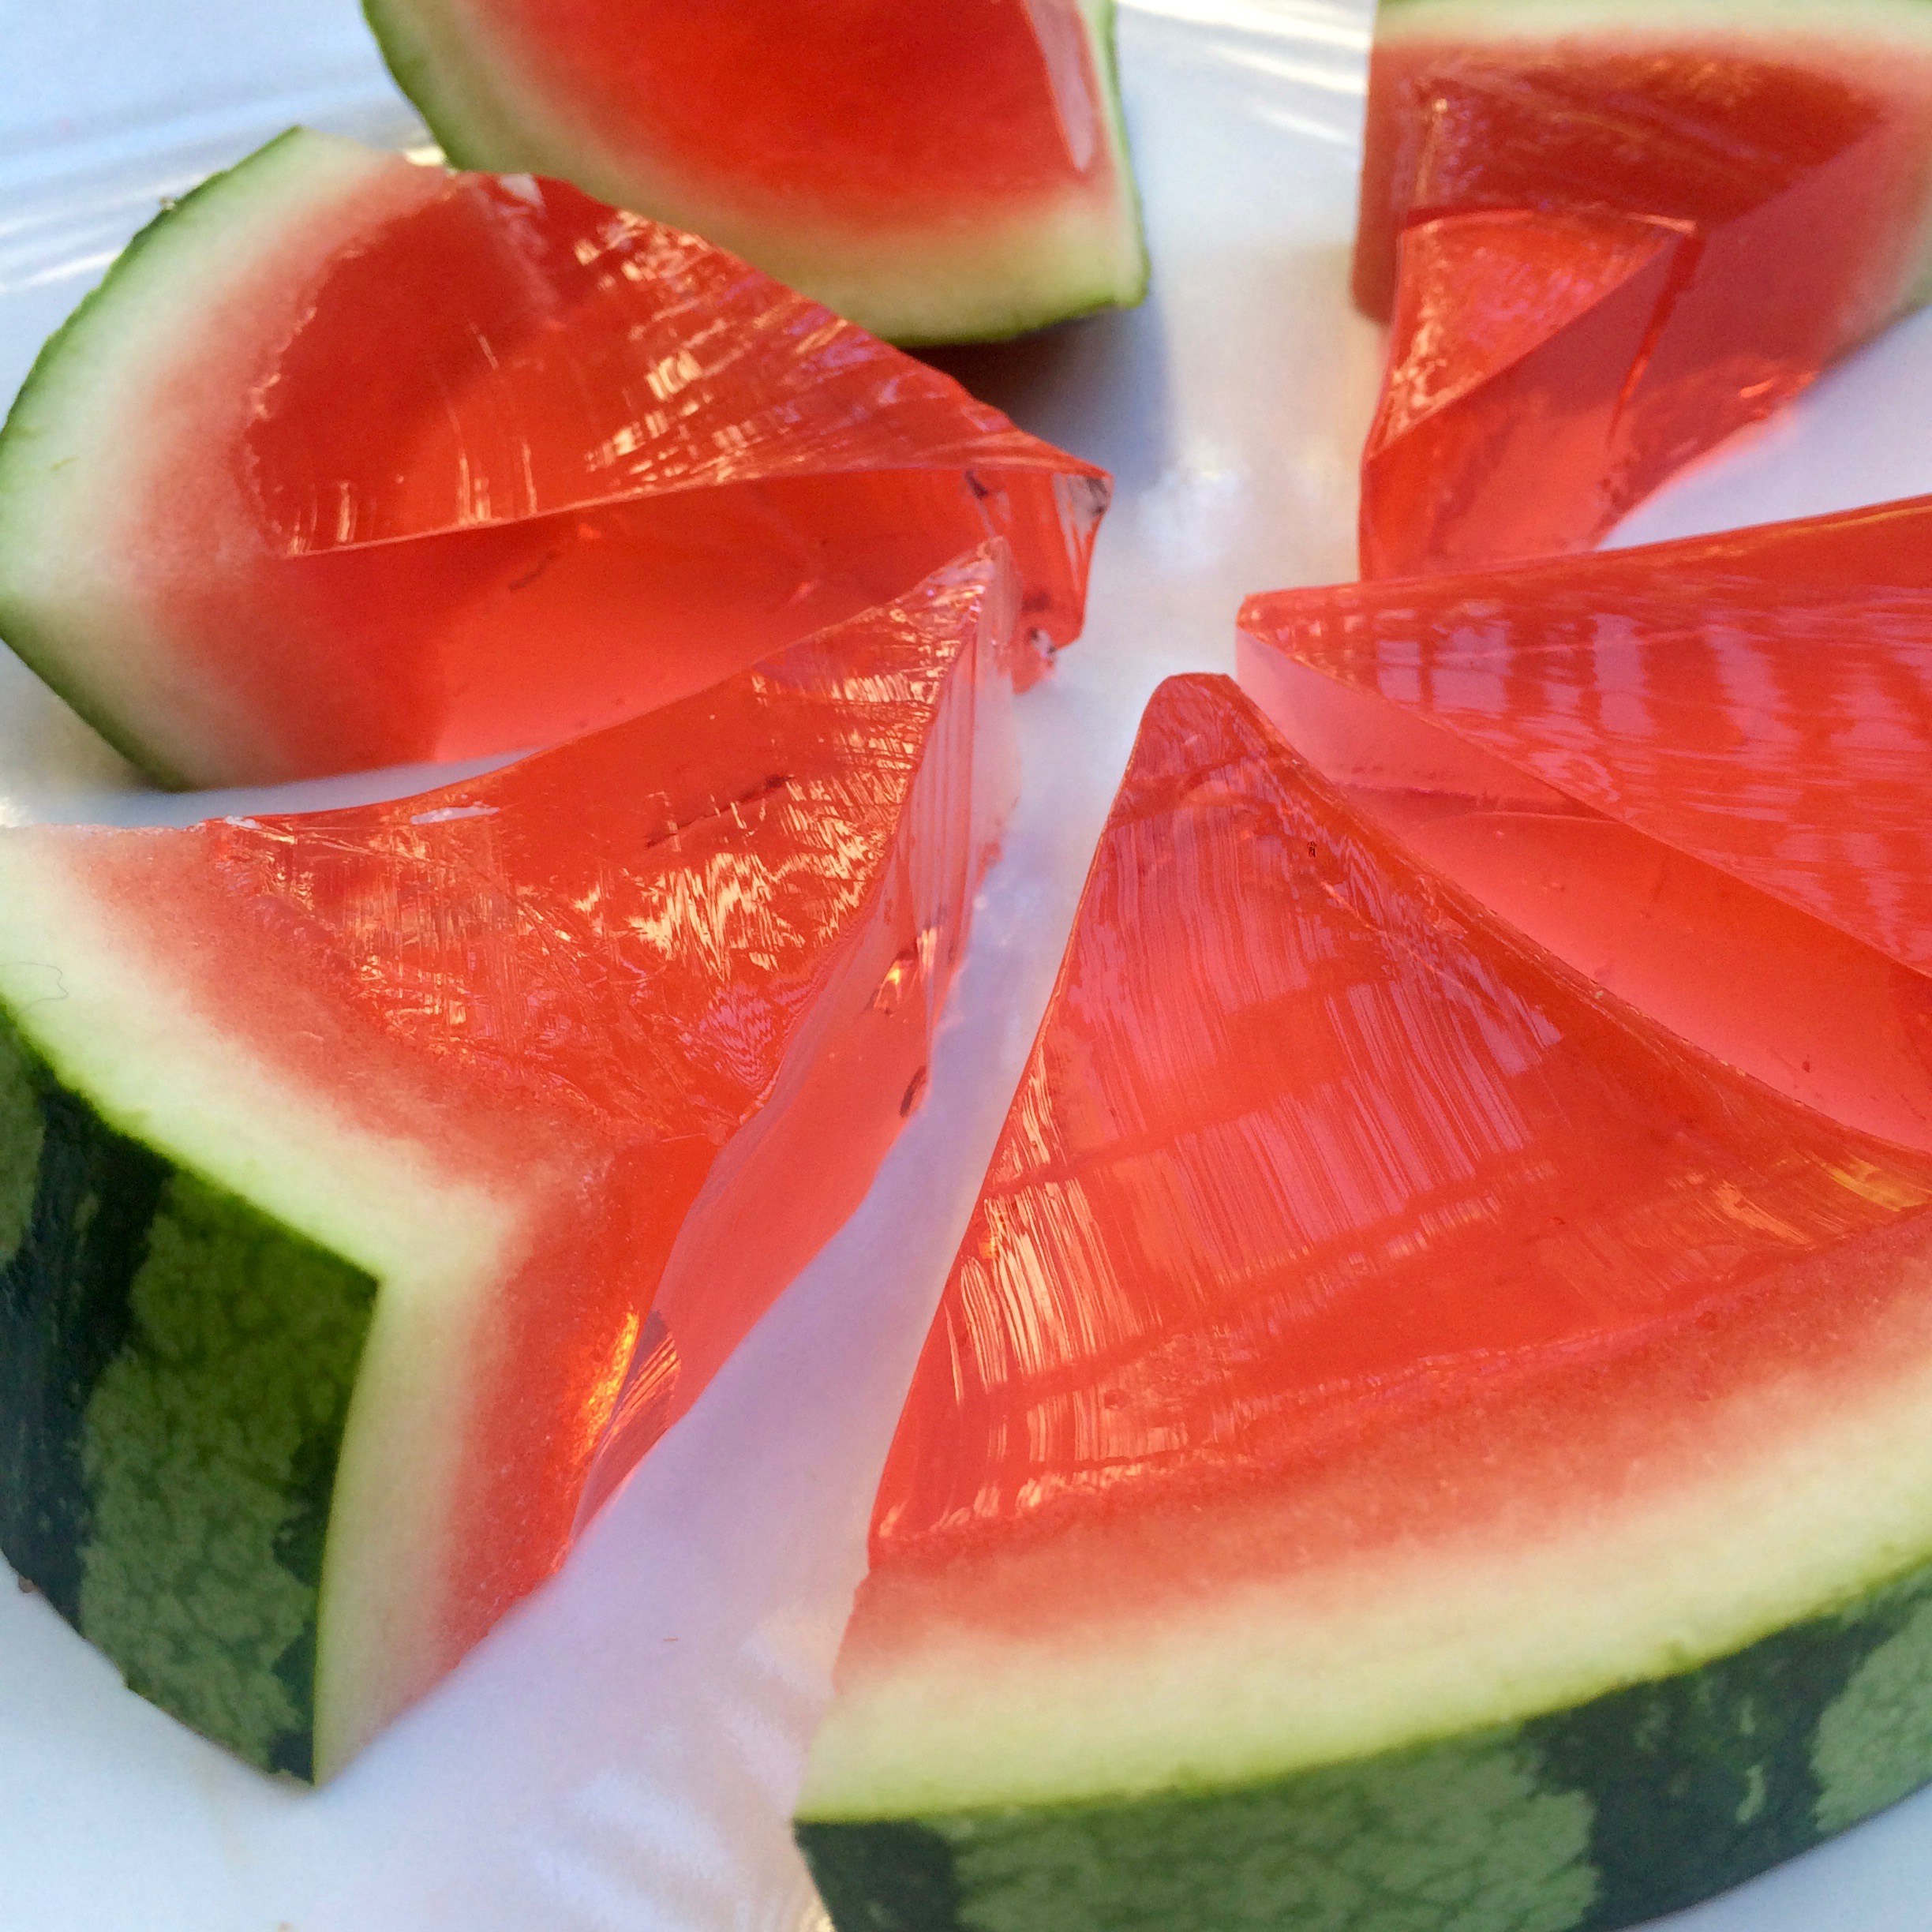 Sliced Watermelon Jello Shots - Positively Stacey